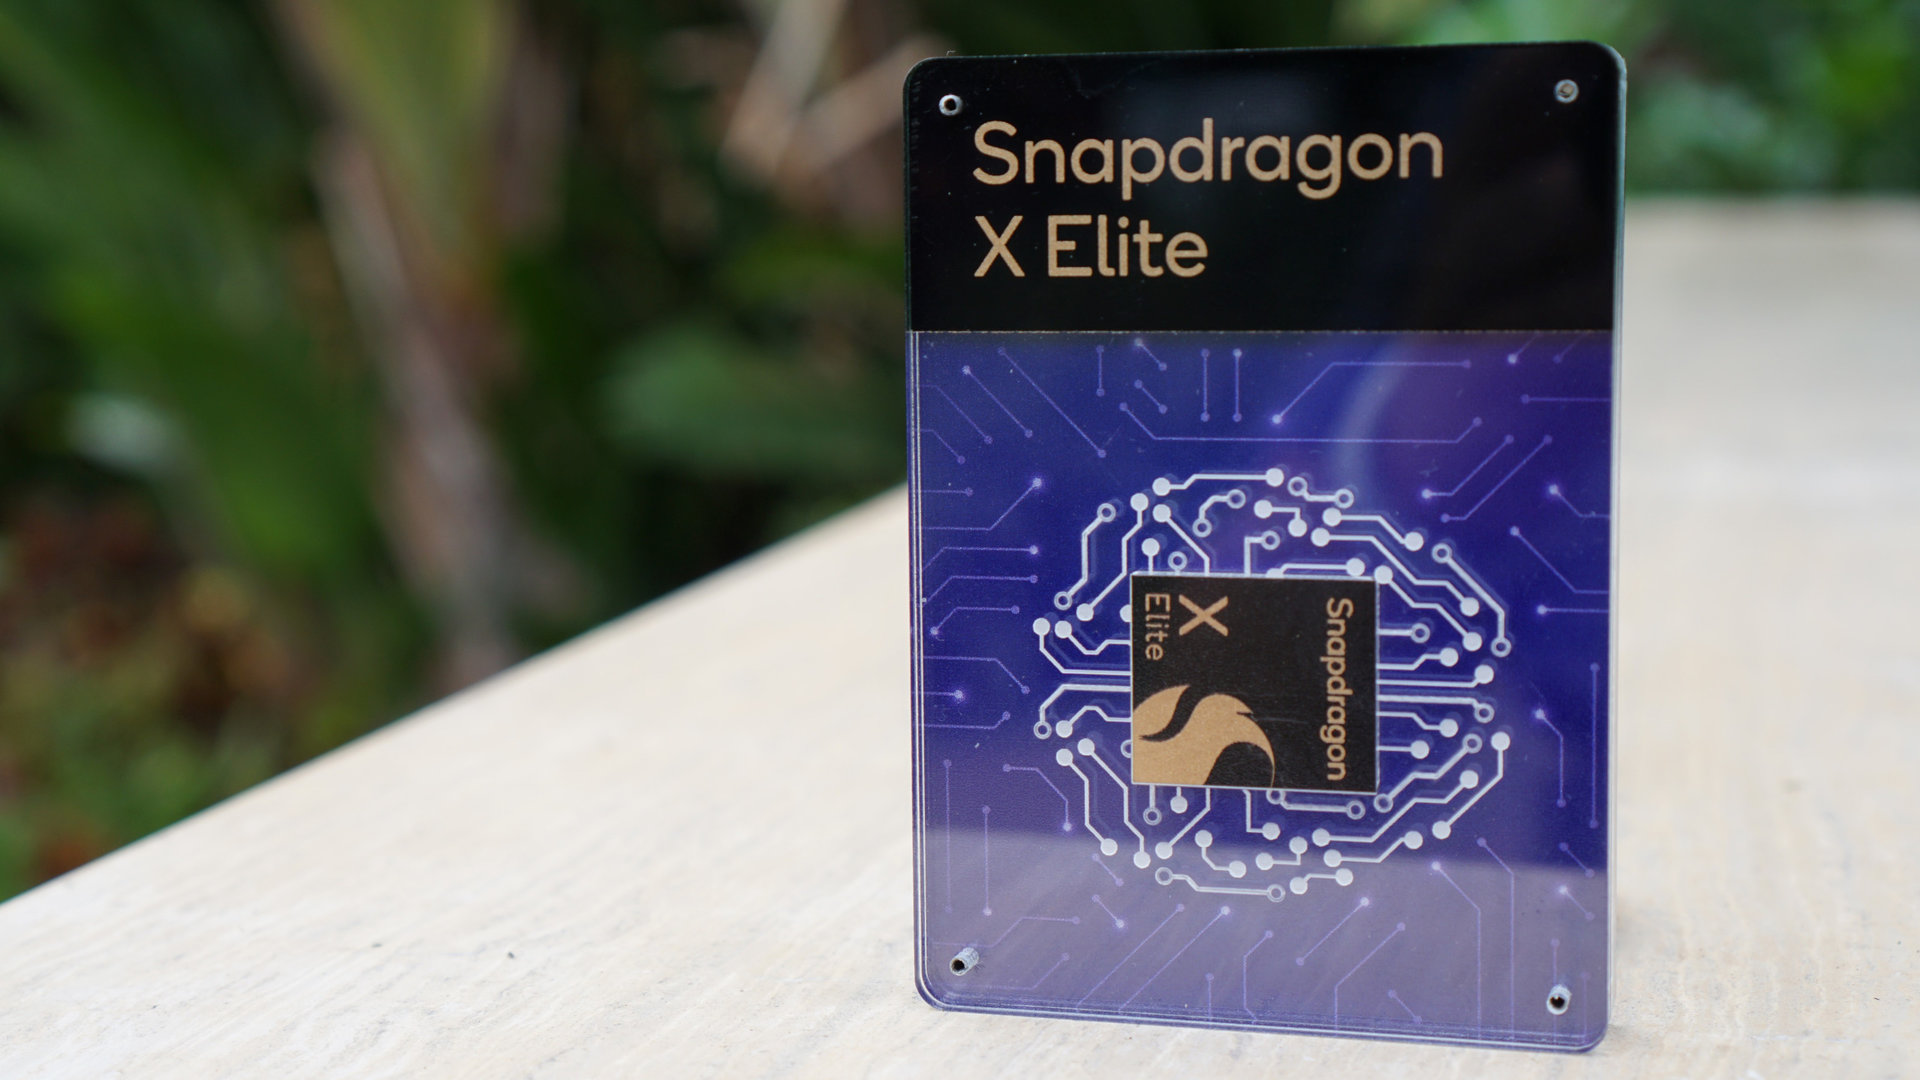 How do Snapdragon X Elite benchmarks compare to Apple and Intel?